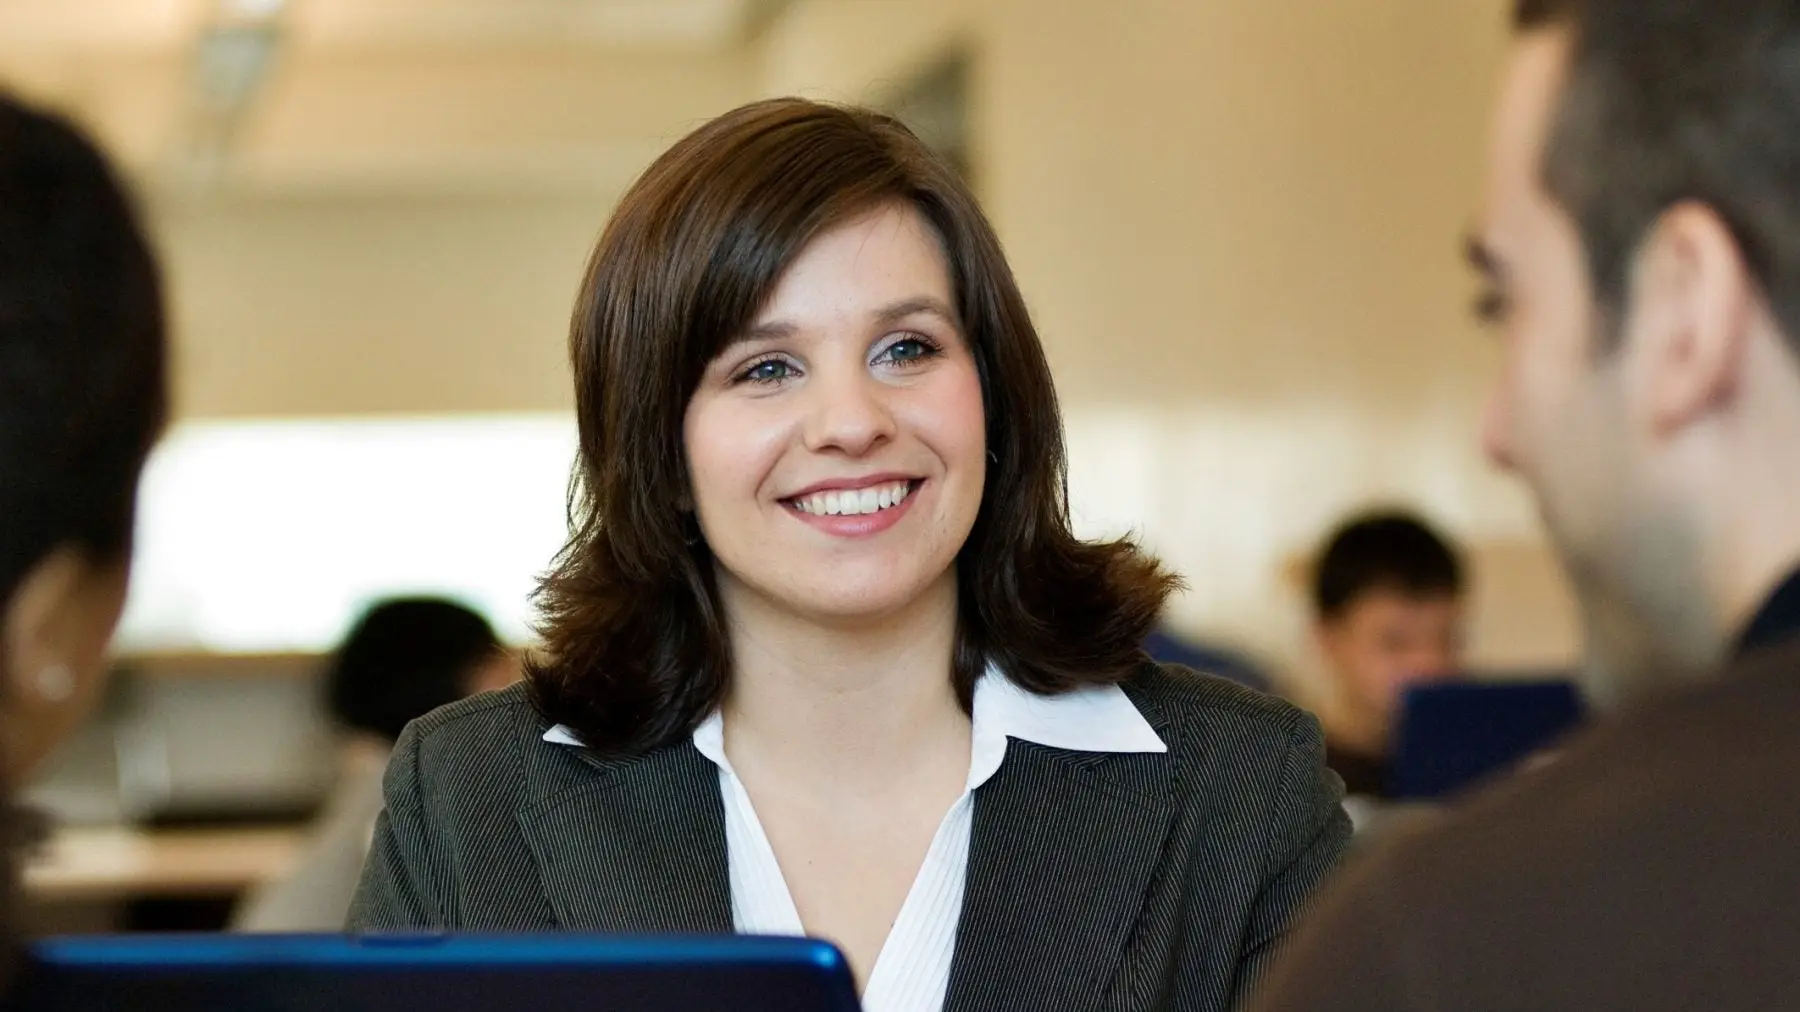 A woman in business attire smiles.